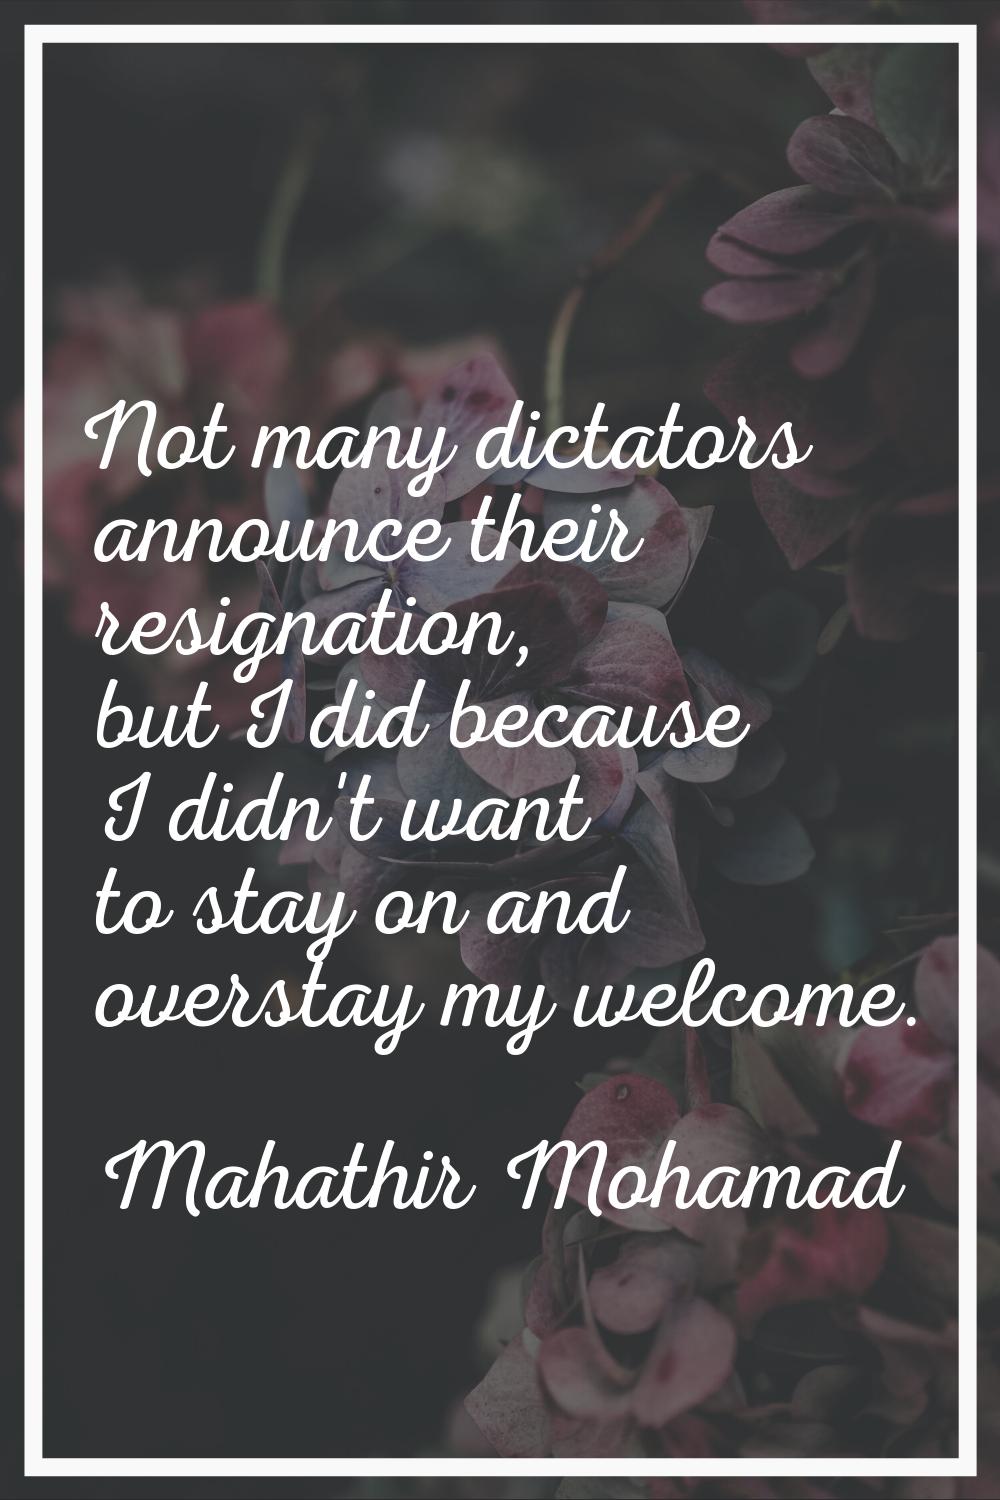 Not many dictators announce their resignation, but I did because I didn't want to stay on and overs